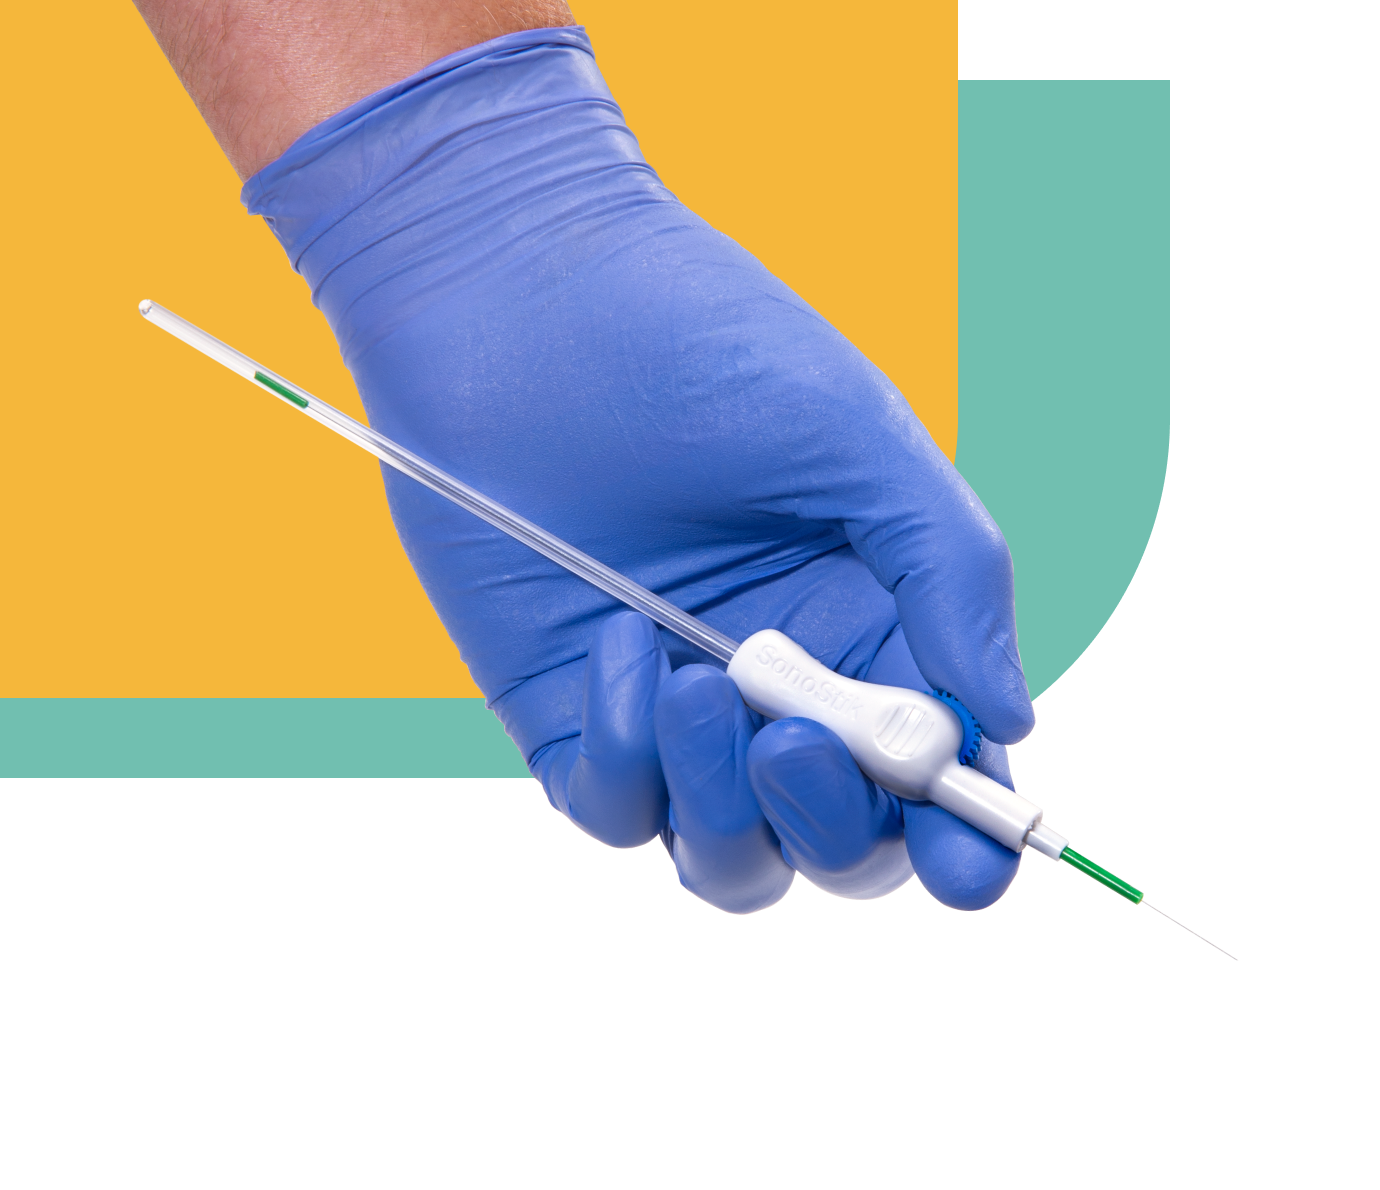 A clinician’s gloved hand holding the SonoStik IV Guidewire Introducer, a venous access device